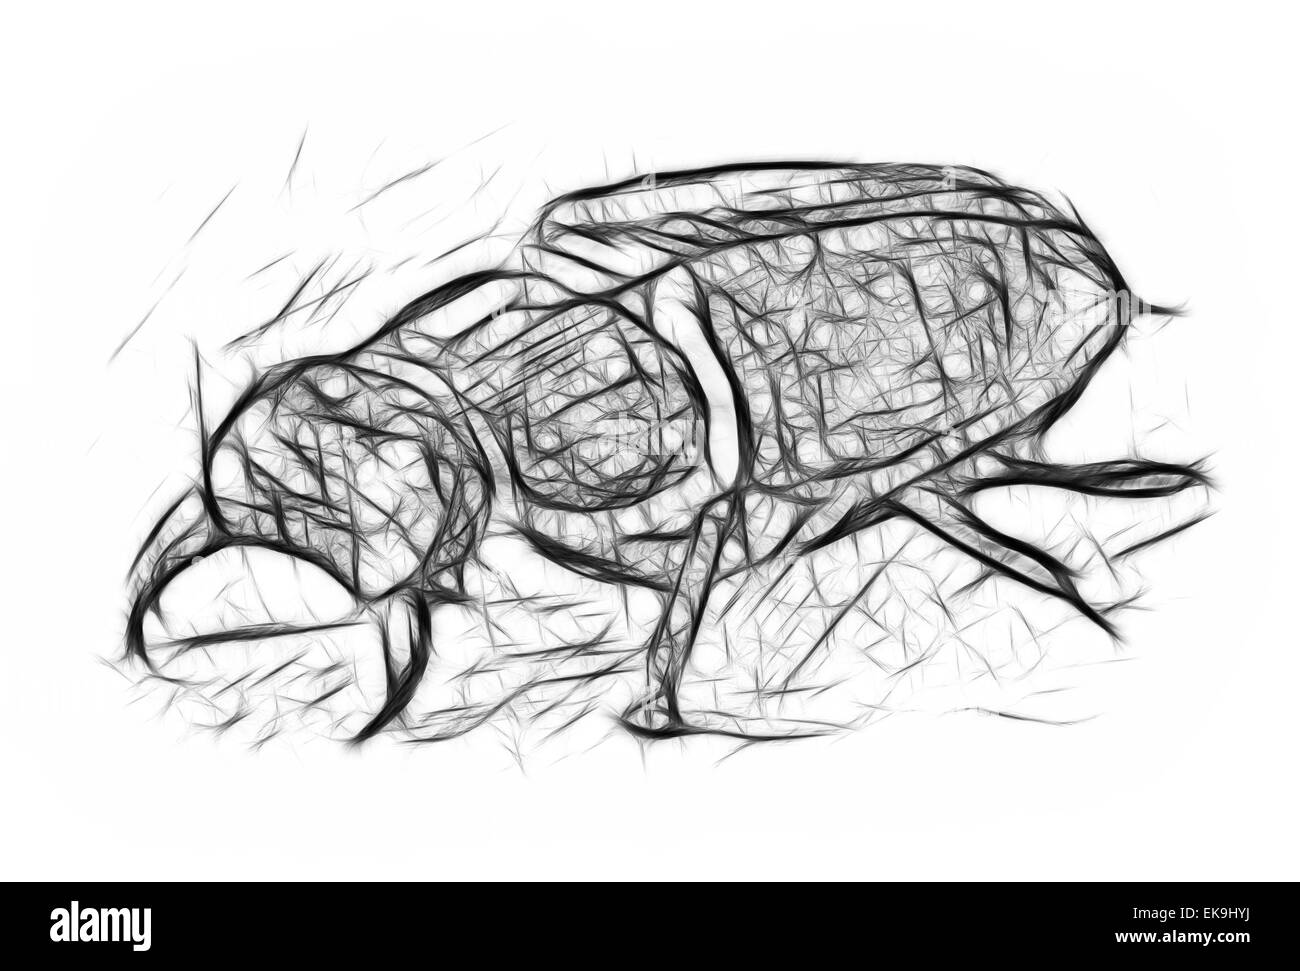 How To Draw Insects In Pencil